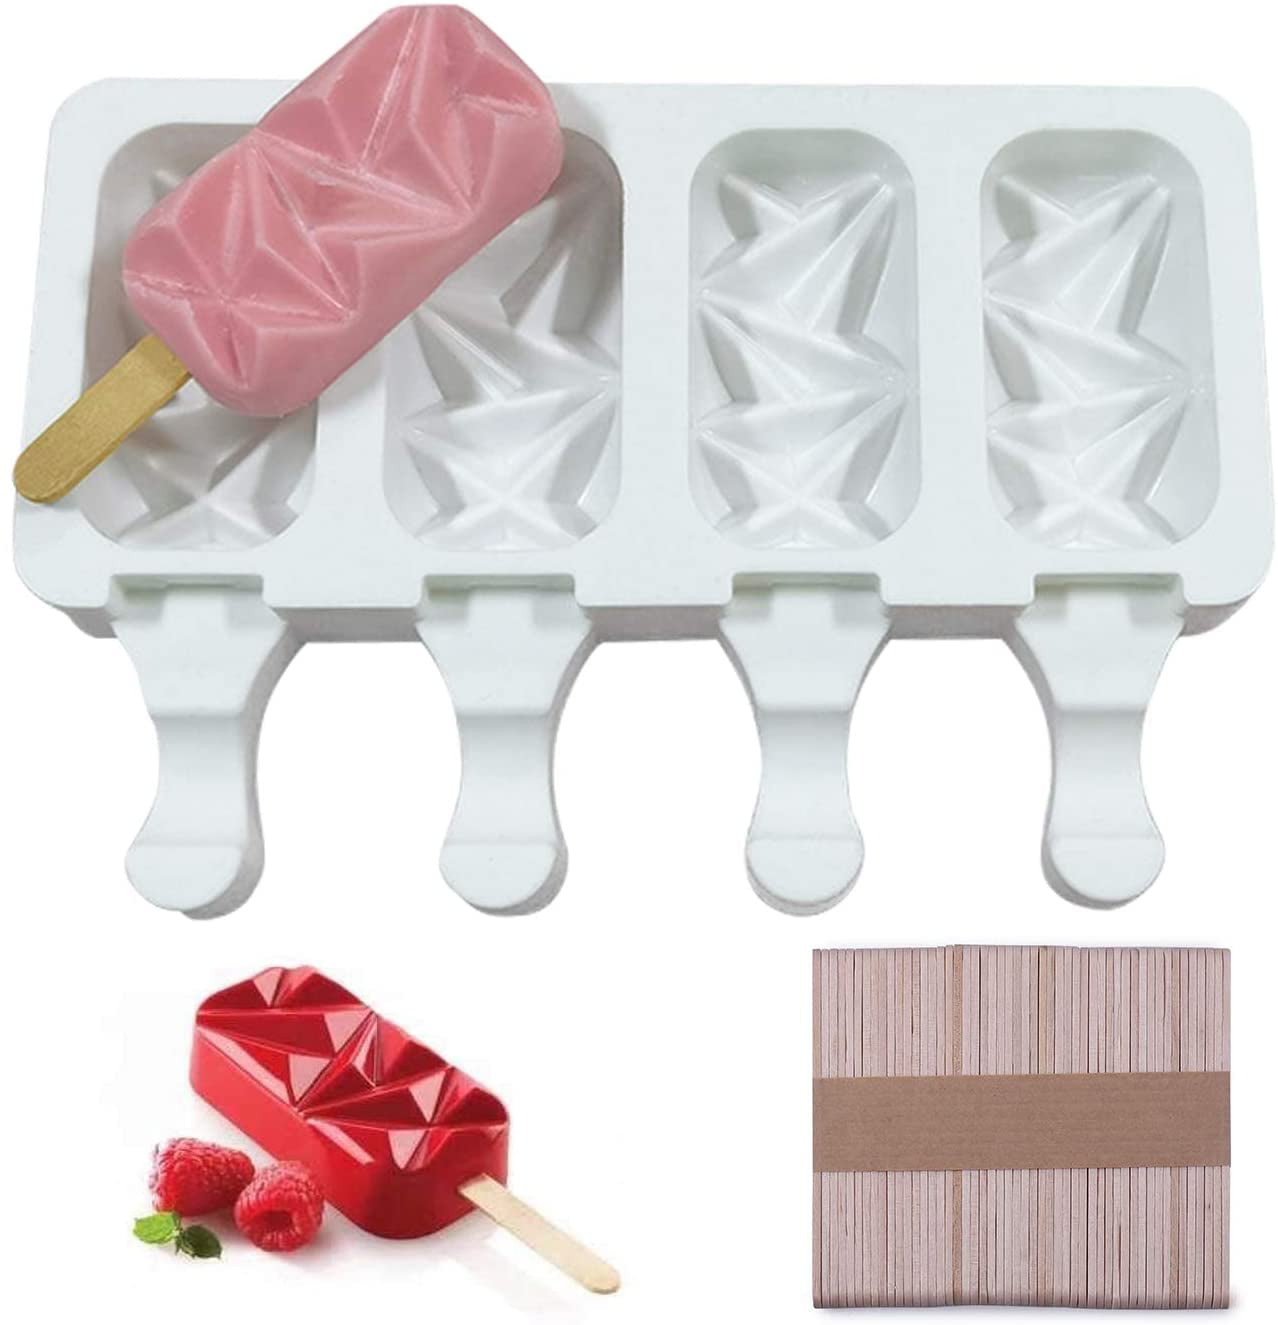 Tree Frozen DIY Popsicle Mold Ice Cream Maker Silicone Tray Lollipop Mould 